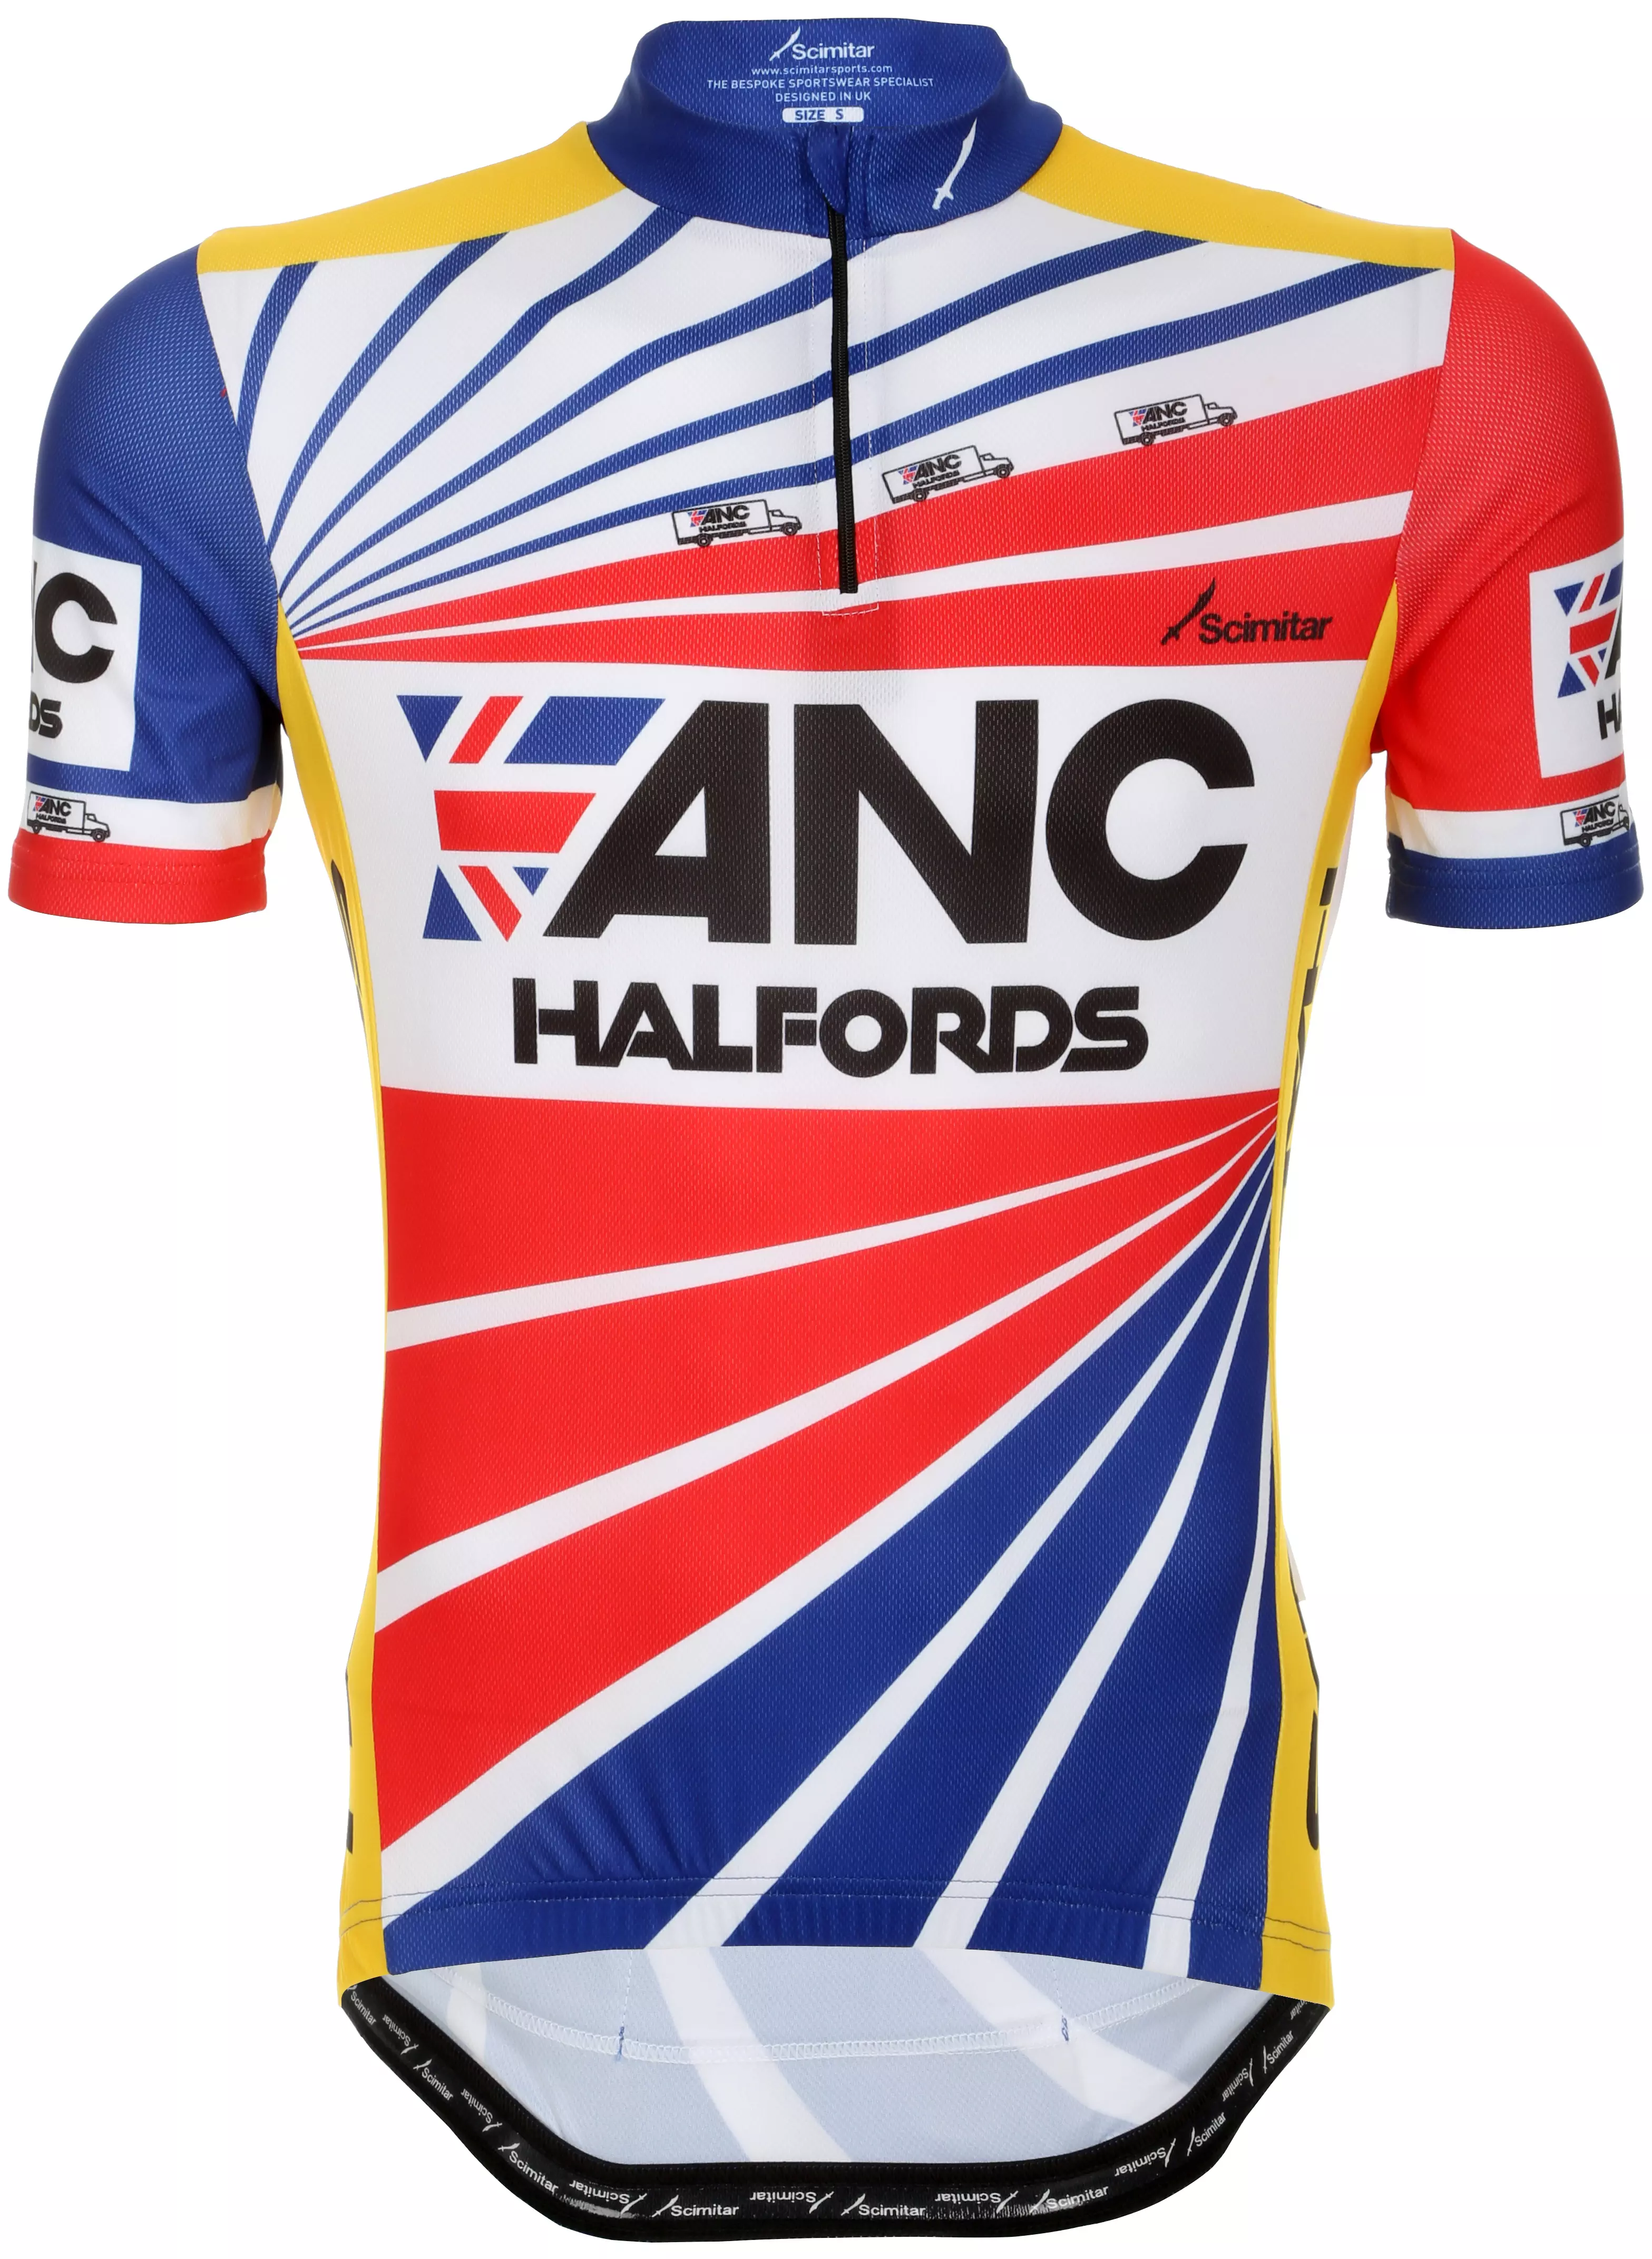 nhs cycling jersey